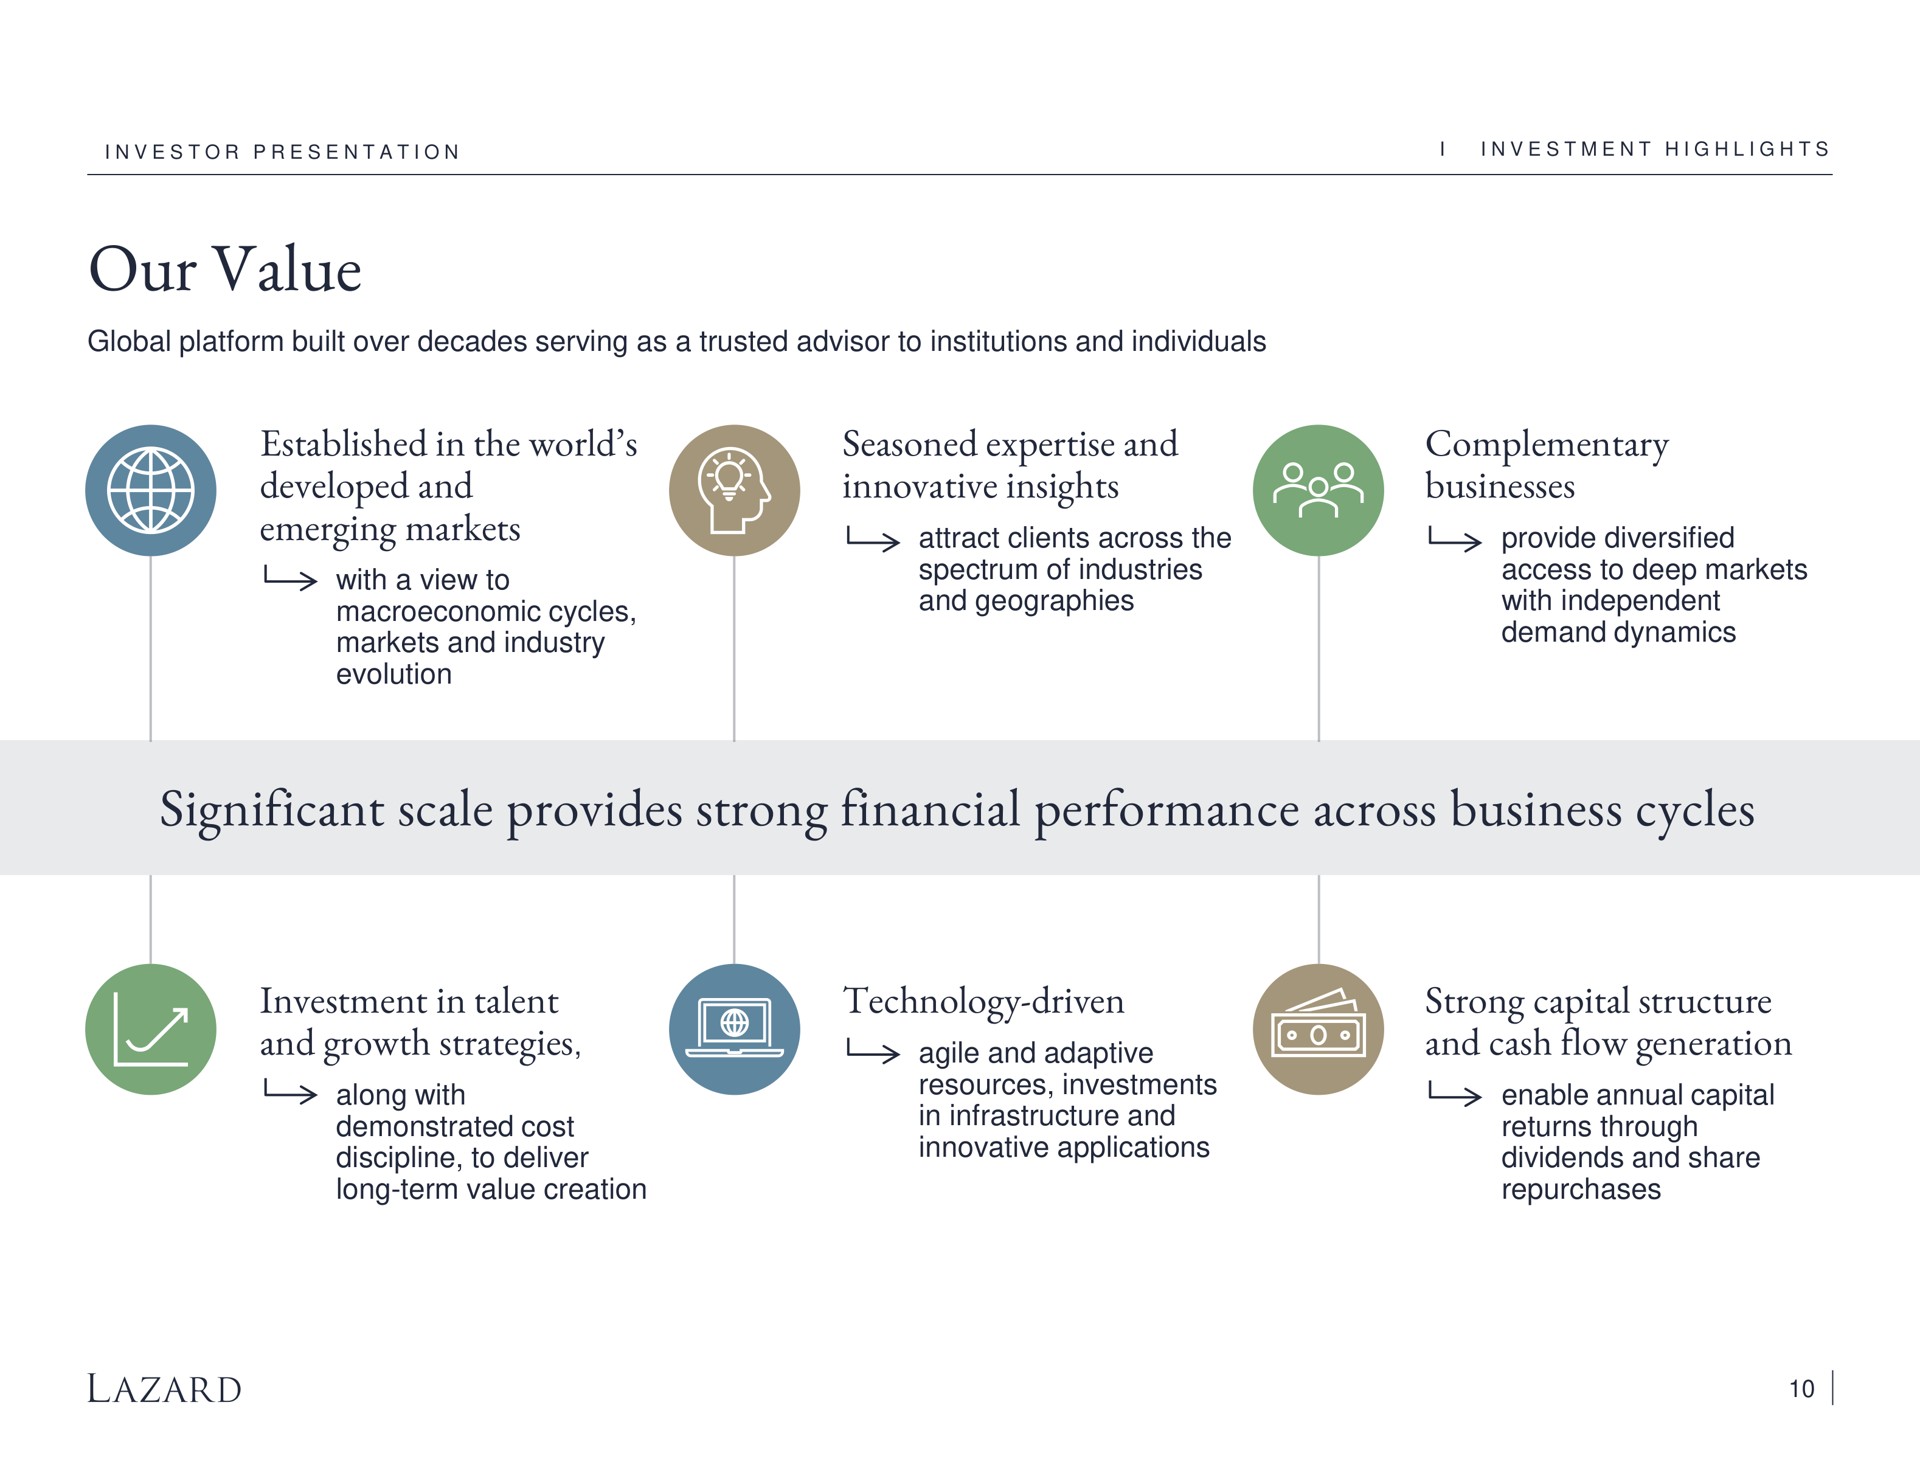 our value established in the world developed and emerging markets seasoned and innovative insights complementary businesses significant scale provides strong financial performance across business cycles investment in talent and growth strategies technology driven strong capital structure and cash flow generation attract clients geographies provide diversified with independent along with demonstrated cost discipline to deliver agile adaptive resources investments infrastructure applications enable annual returns through dividends share | Lazard